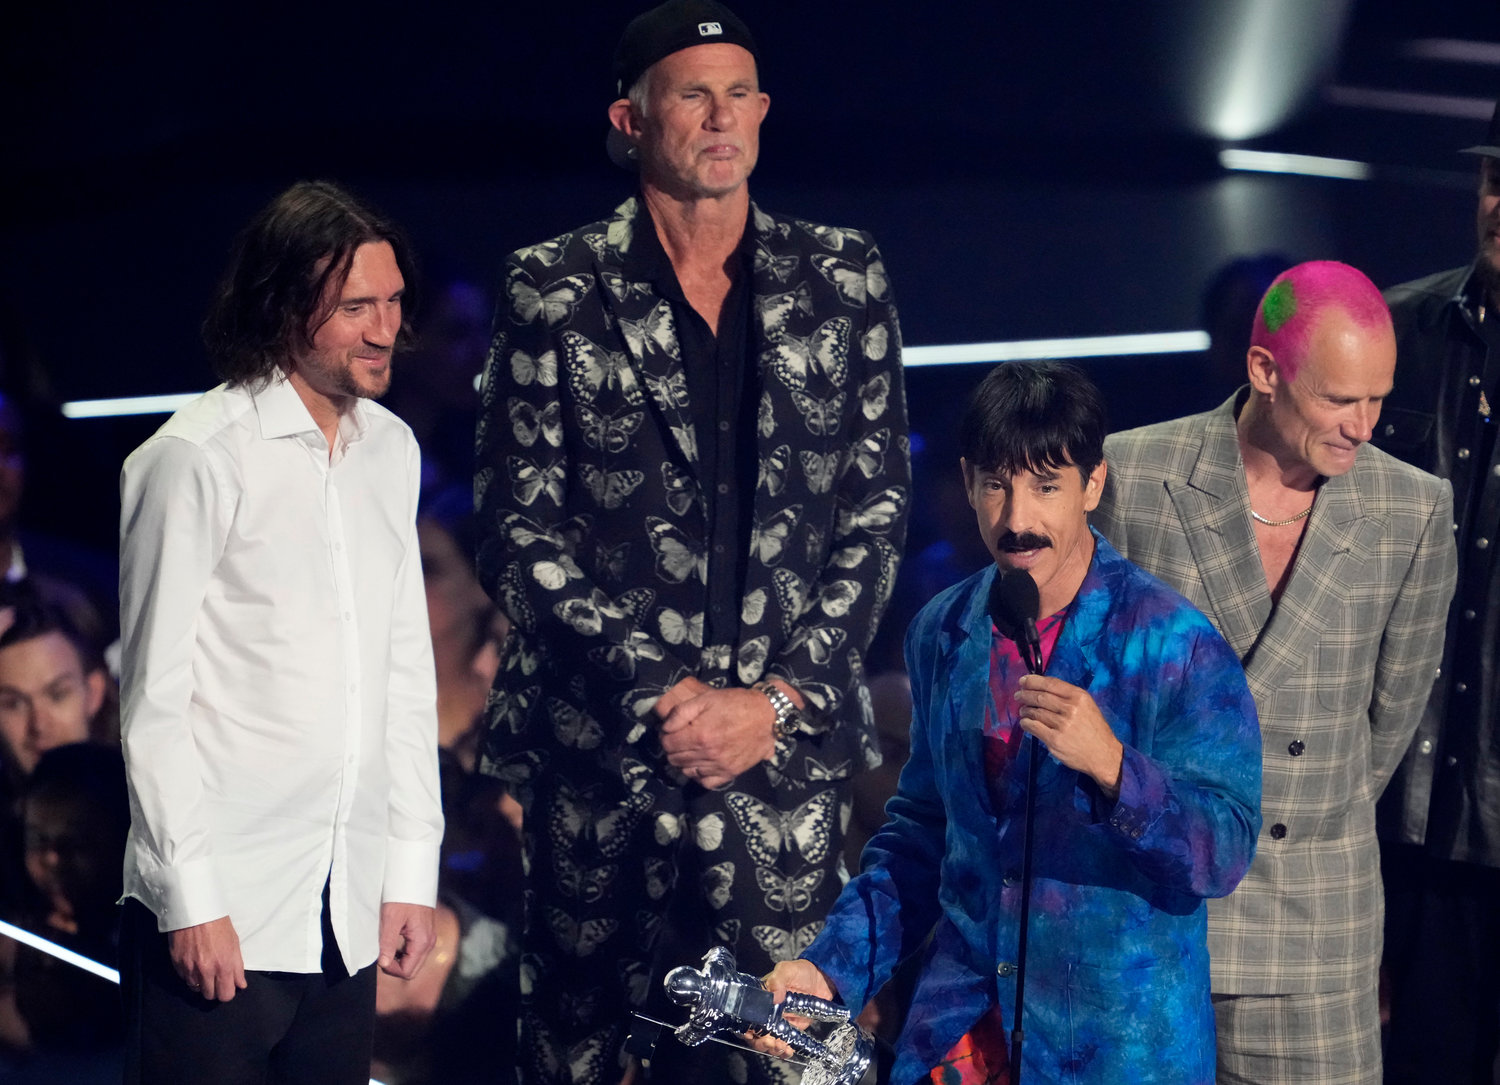 Anthony Kiedis, of Red Hot Chili Peppers, accepts the award for best rock for "Black Summer" at the MTV Video Music Awards at the Prudential Center on Sunday, Aug. 28, 2022, in Newark, N.J. From left looking on are fellow band member John Frusciante, Chad Smith and Flea. Fresh off a world tour and two albums this year, Red Hot Chili Peppers are preparing for a set of stadium shows and festival stops across North America and Europe in 2023.